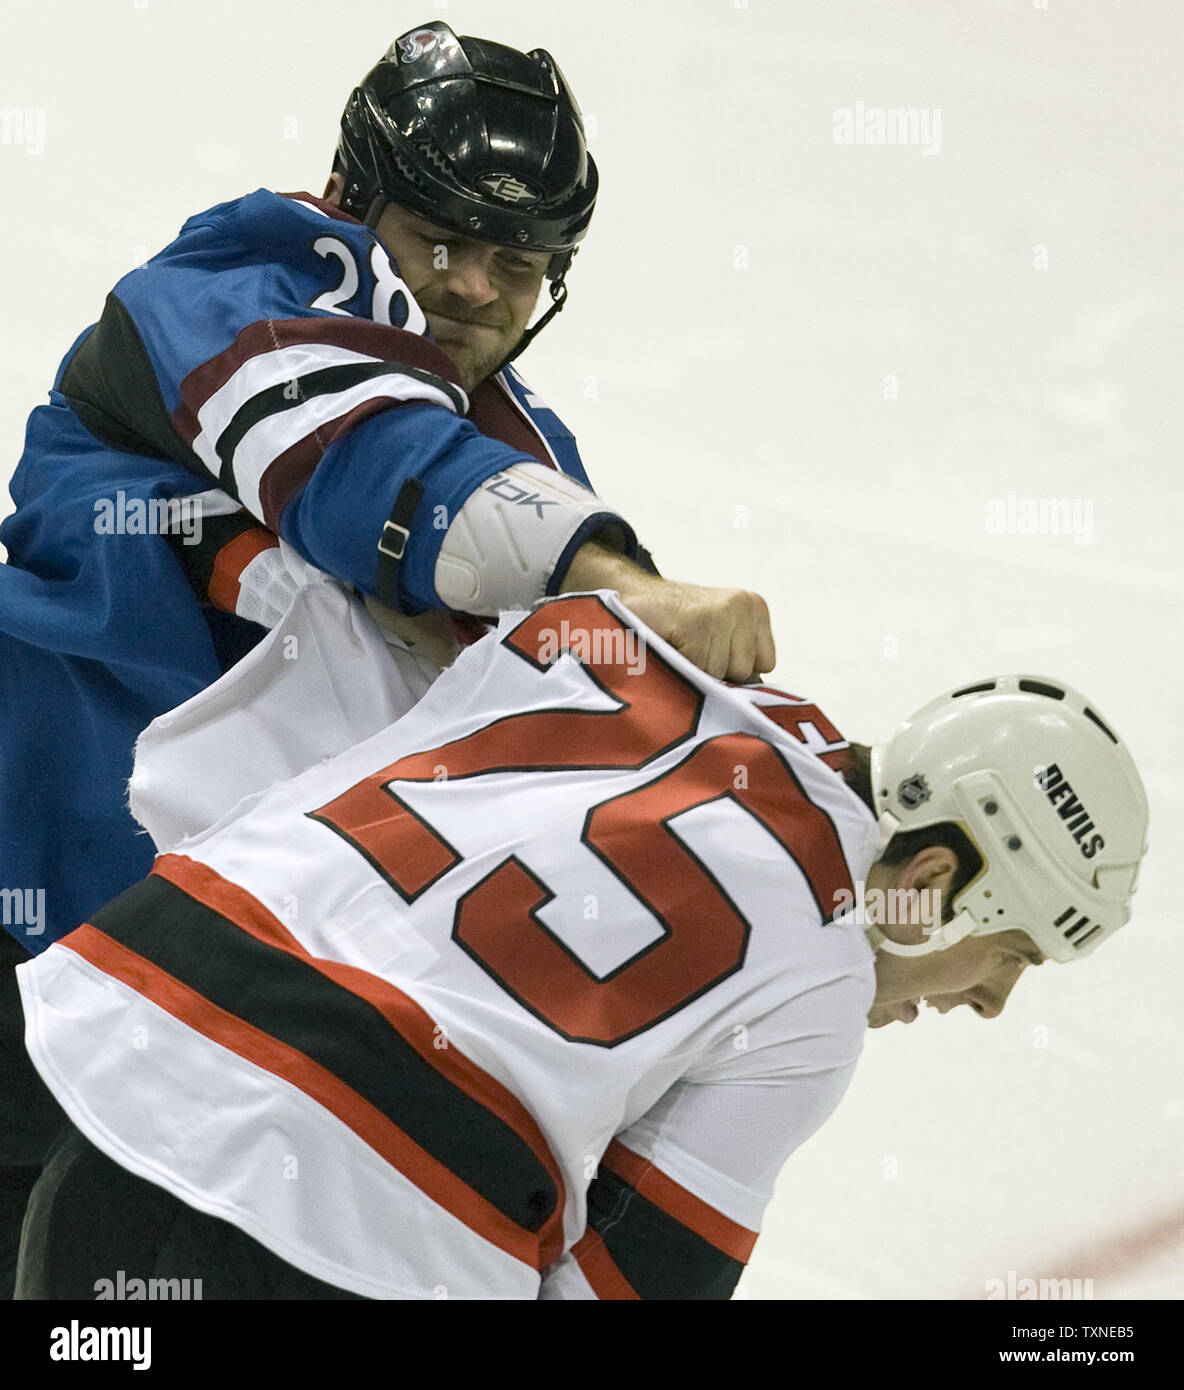 Colorado Avalanche David Koci (L) and New Jersey Devils Andrew Peters  engage in an early fight drawing five-minute fighting penalties during the  first period at the Pepsi Center in Denver on January